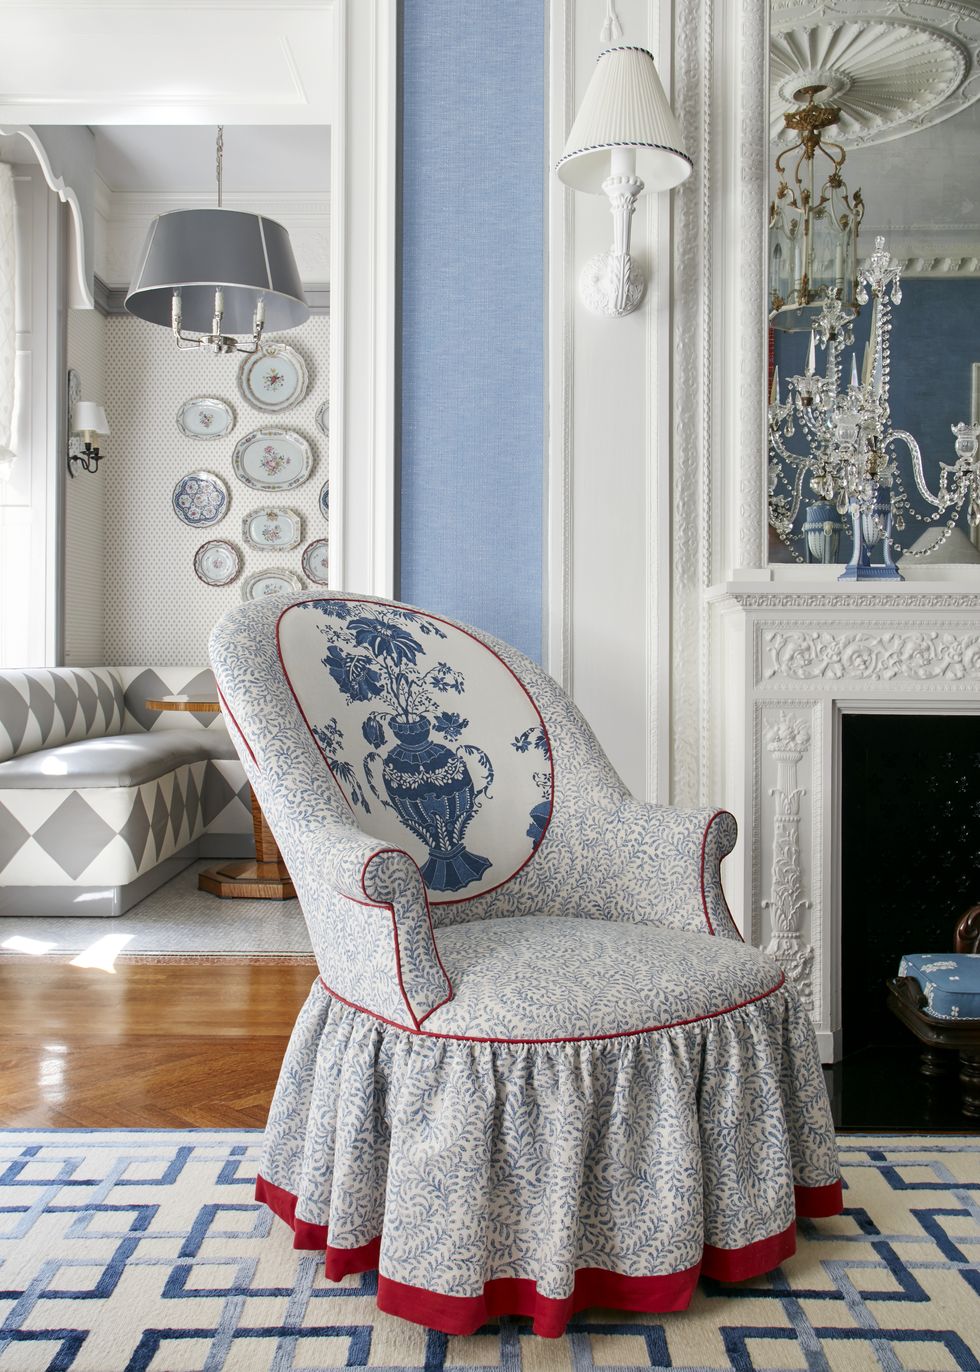 a blue and white upholstered chair sits by a fireplace and you can see a leather banquette in the background with antique china hung on the wall